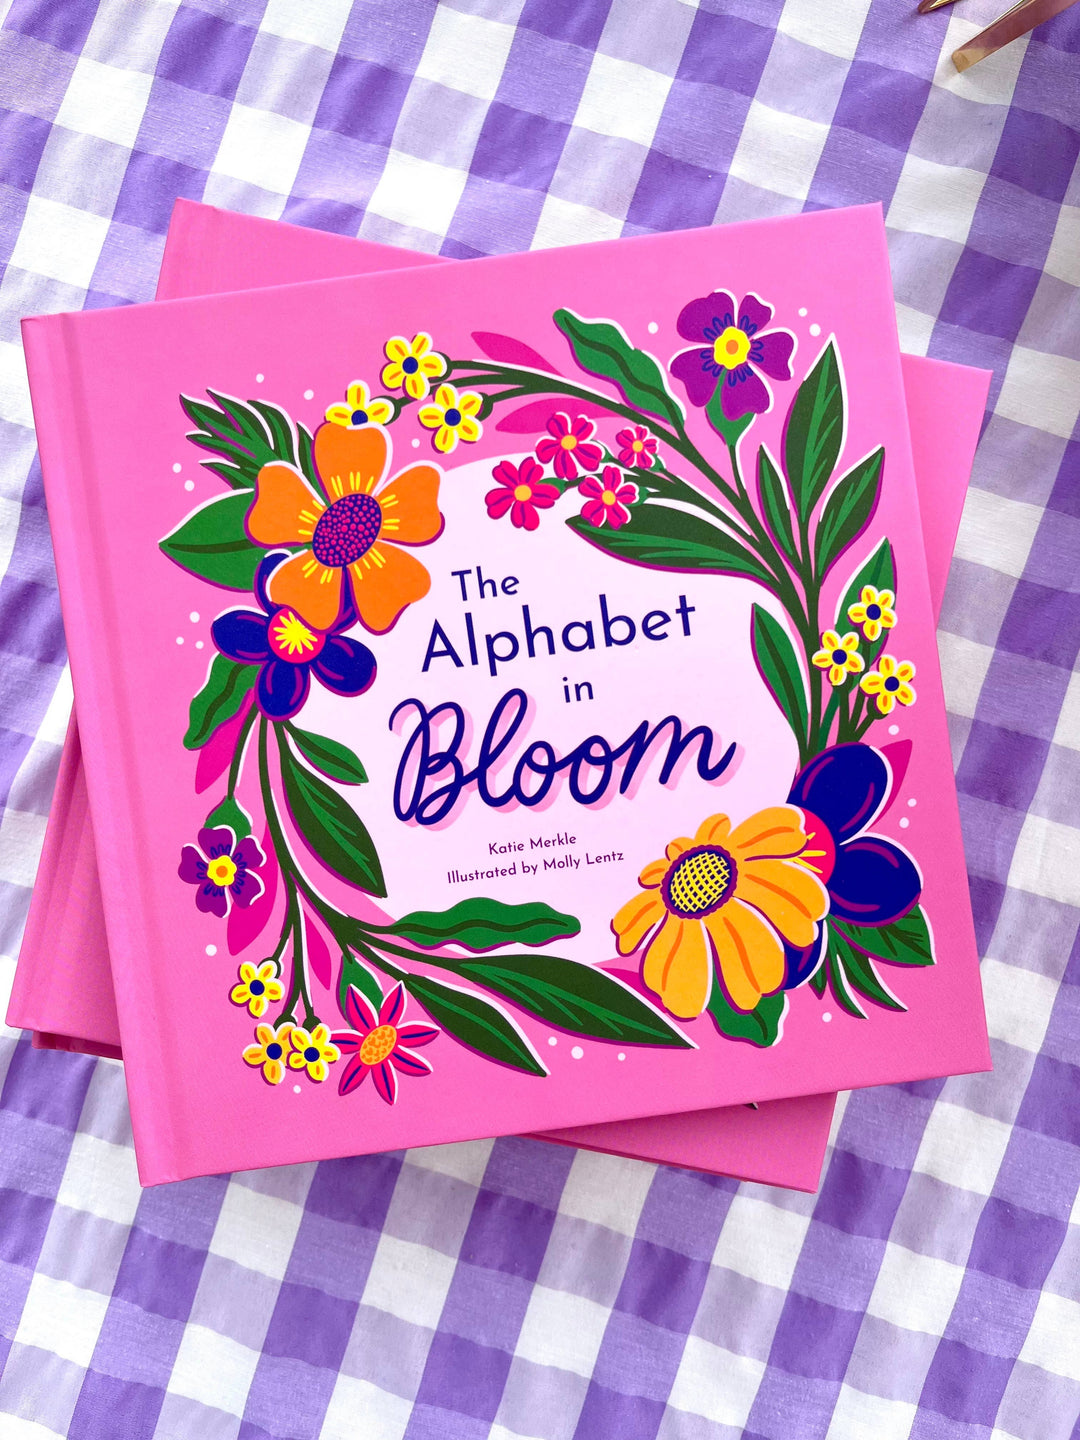 The Alphabet in Bloom is a 7x7 hardcover flower alphabet book with boldly illustrated design.